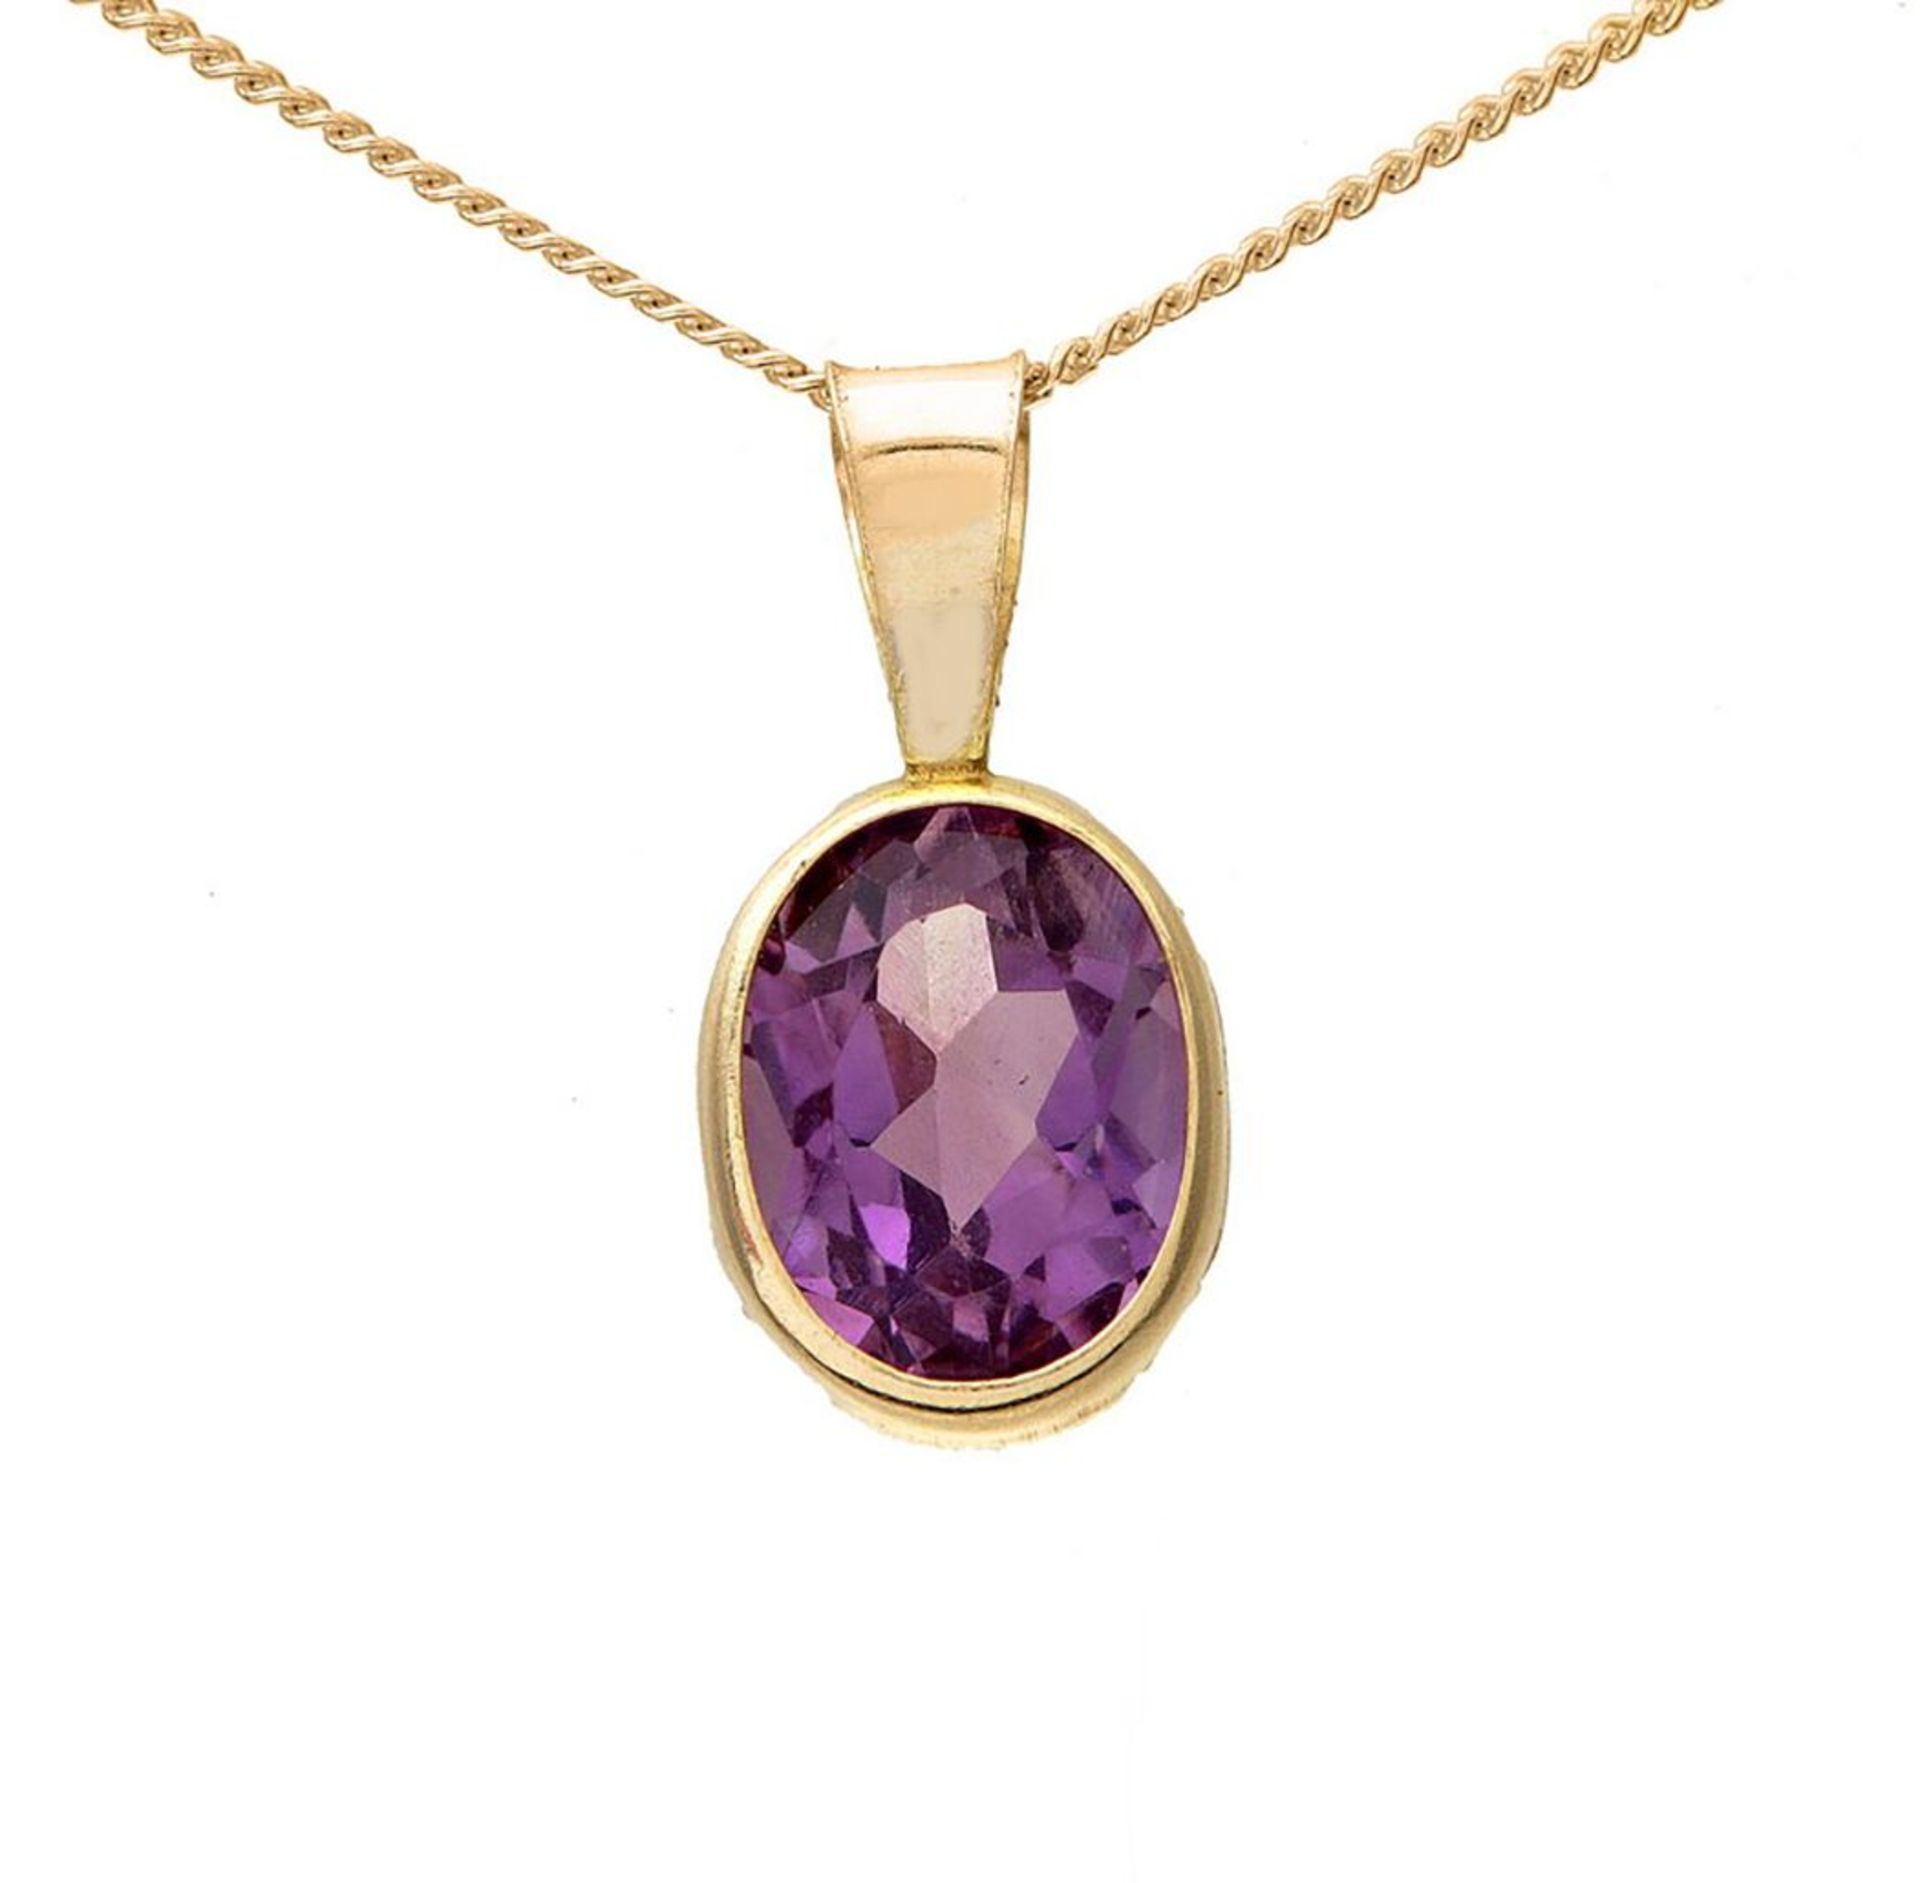 Oval Amethyst Natural Gemstone Pendant With 18" Chain, Metal 9ct Yellow Gold, Weight (g) 1.2, RRP £